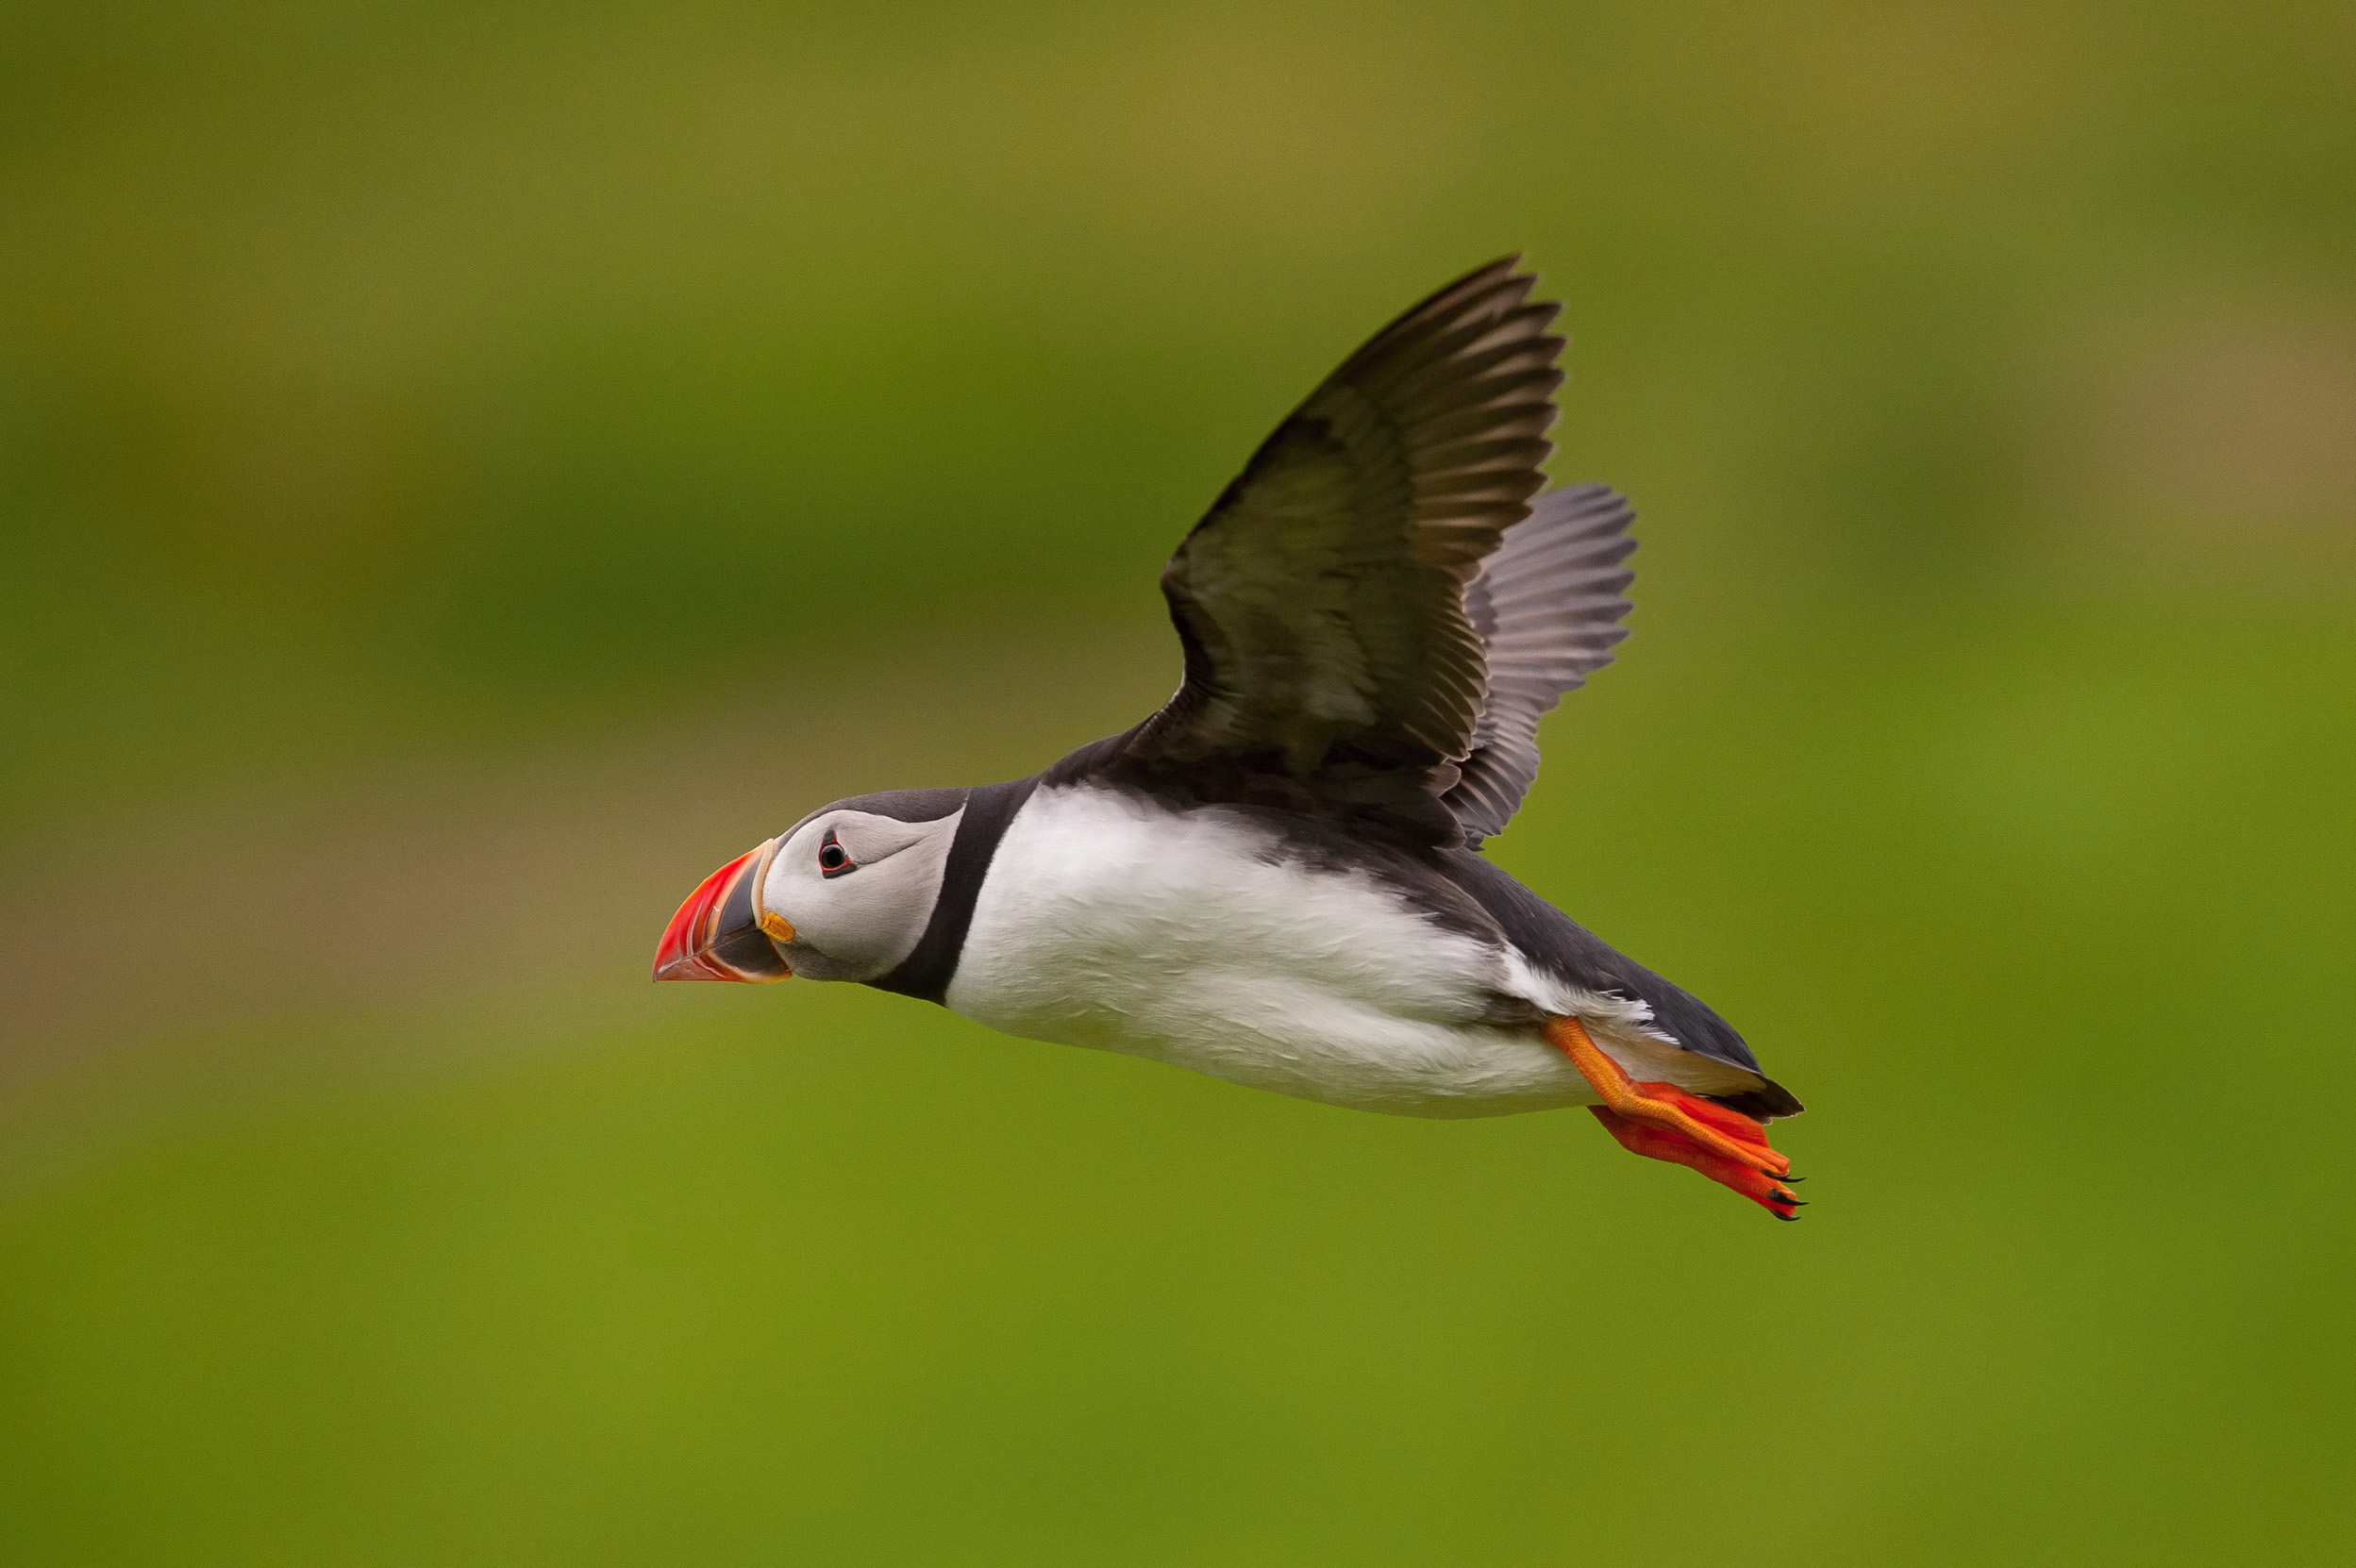 An adult Puffin in mid-flight.